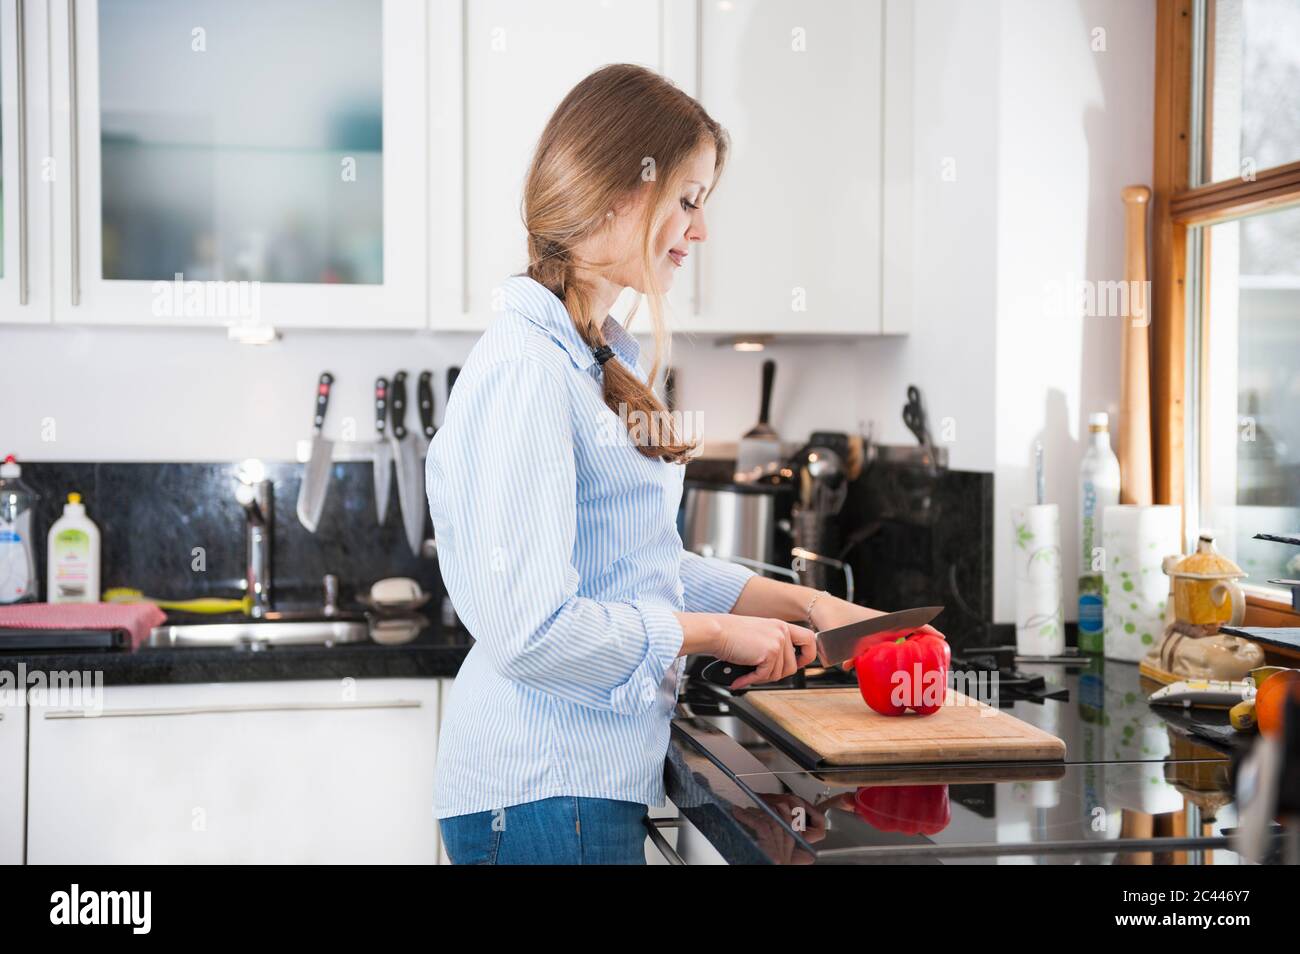 Young woman cutting red bell pepper at kitchen counter Stock Photo